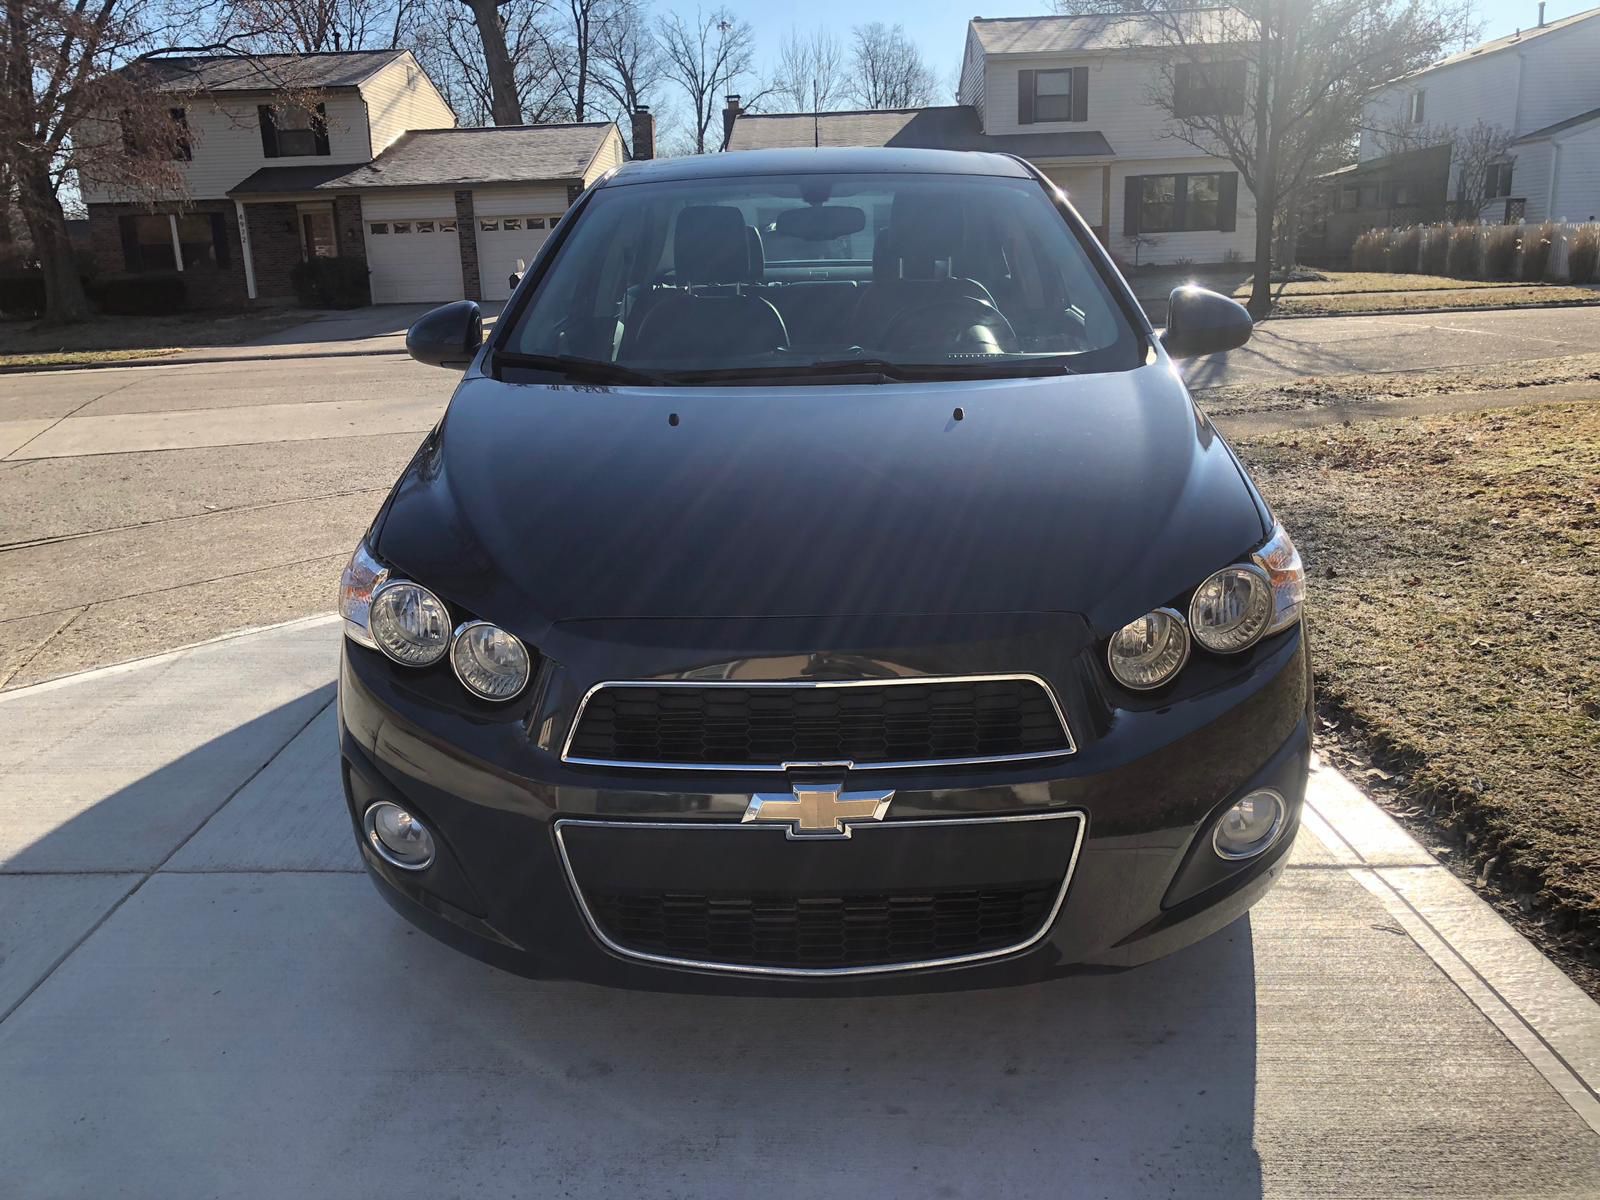 Chevy Sonic 2015 Turbo ☝ miles 82000 , loaded limited , super cute super economy car has , leather seat , heated seat , screen and camera , sport rim